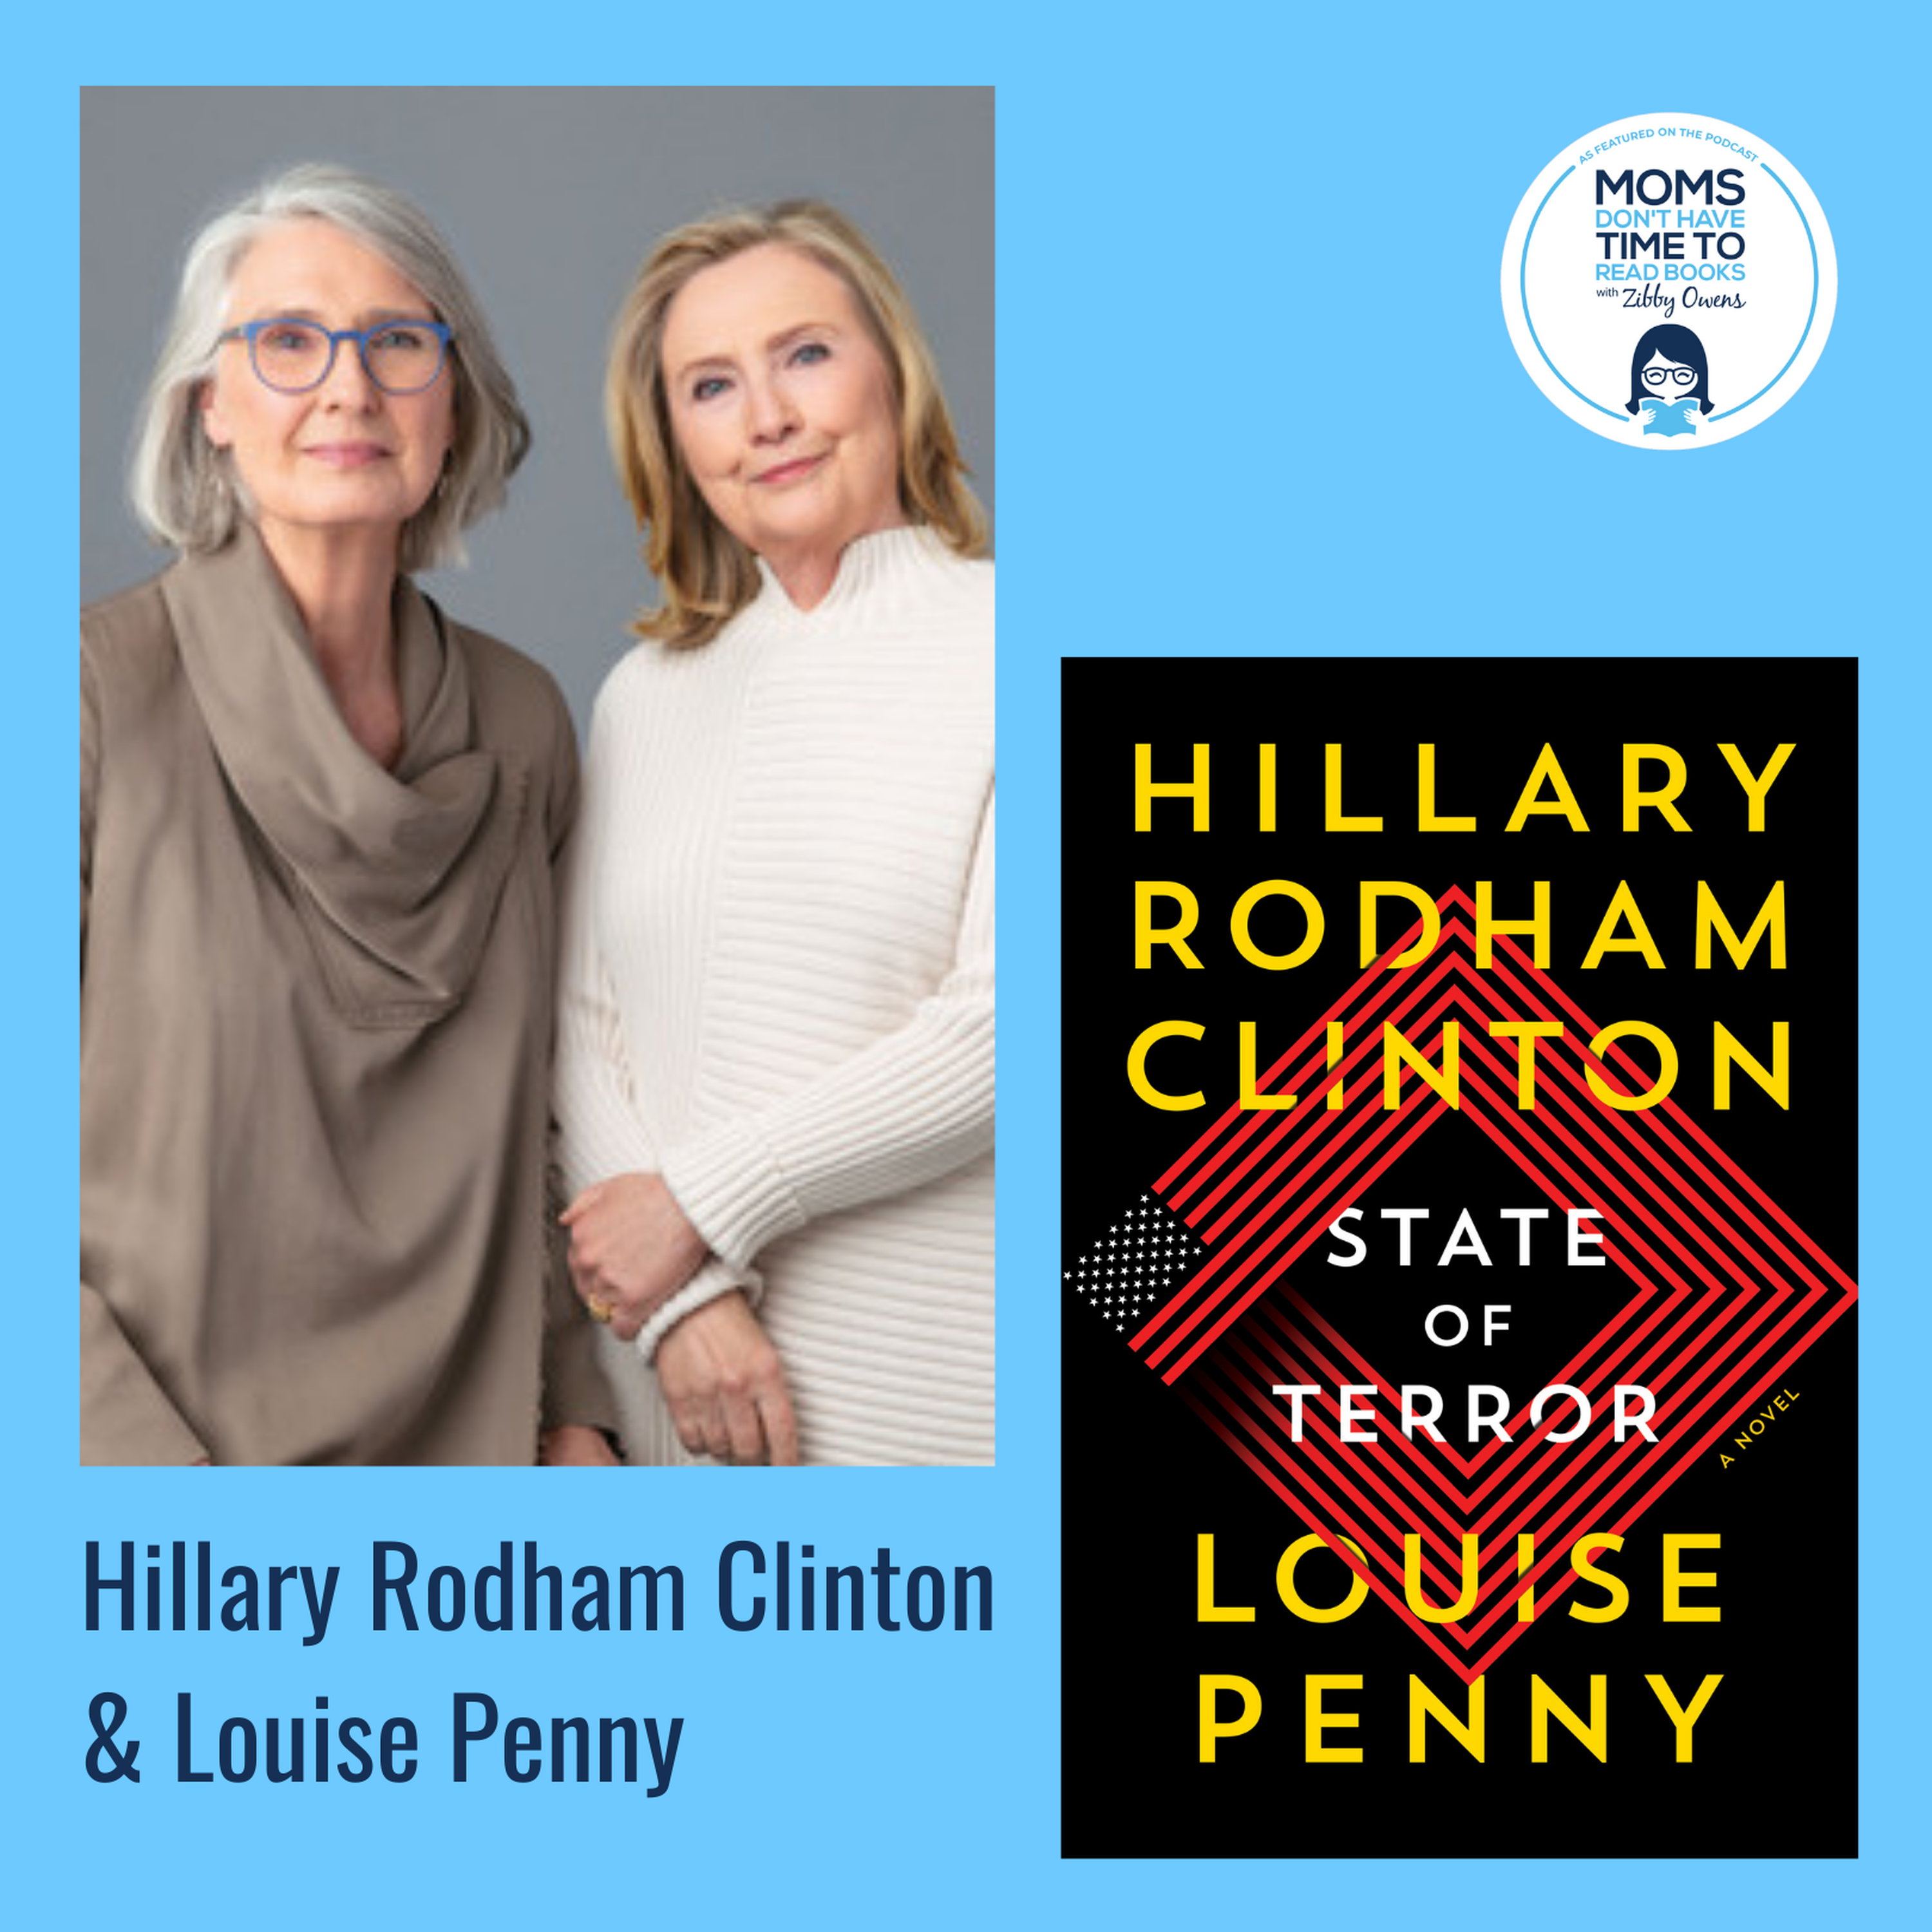 State of Terror by Hillary Clinton & Louise Penny